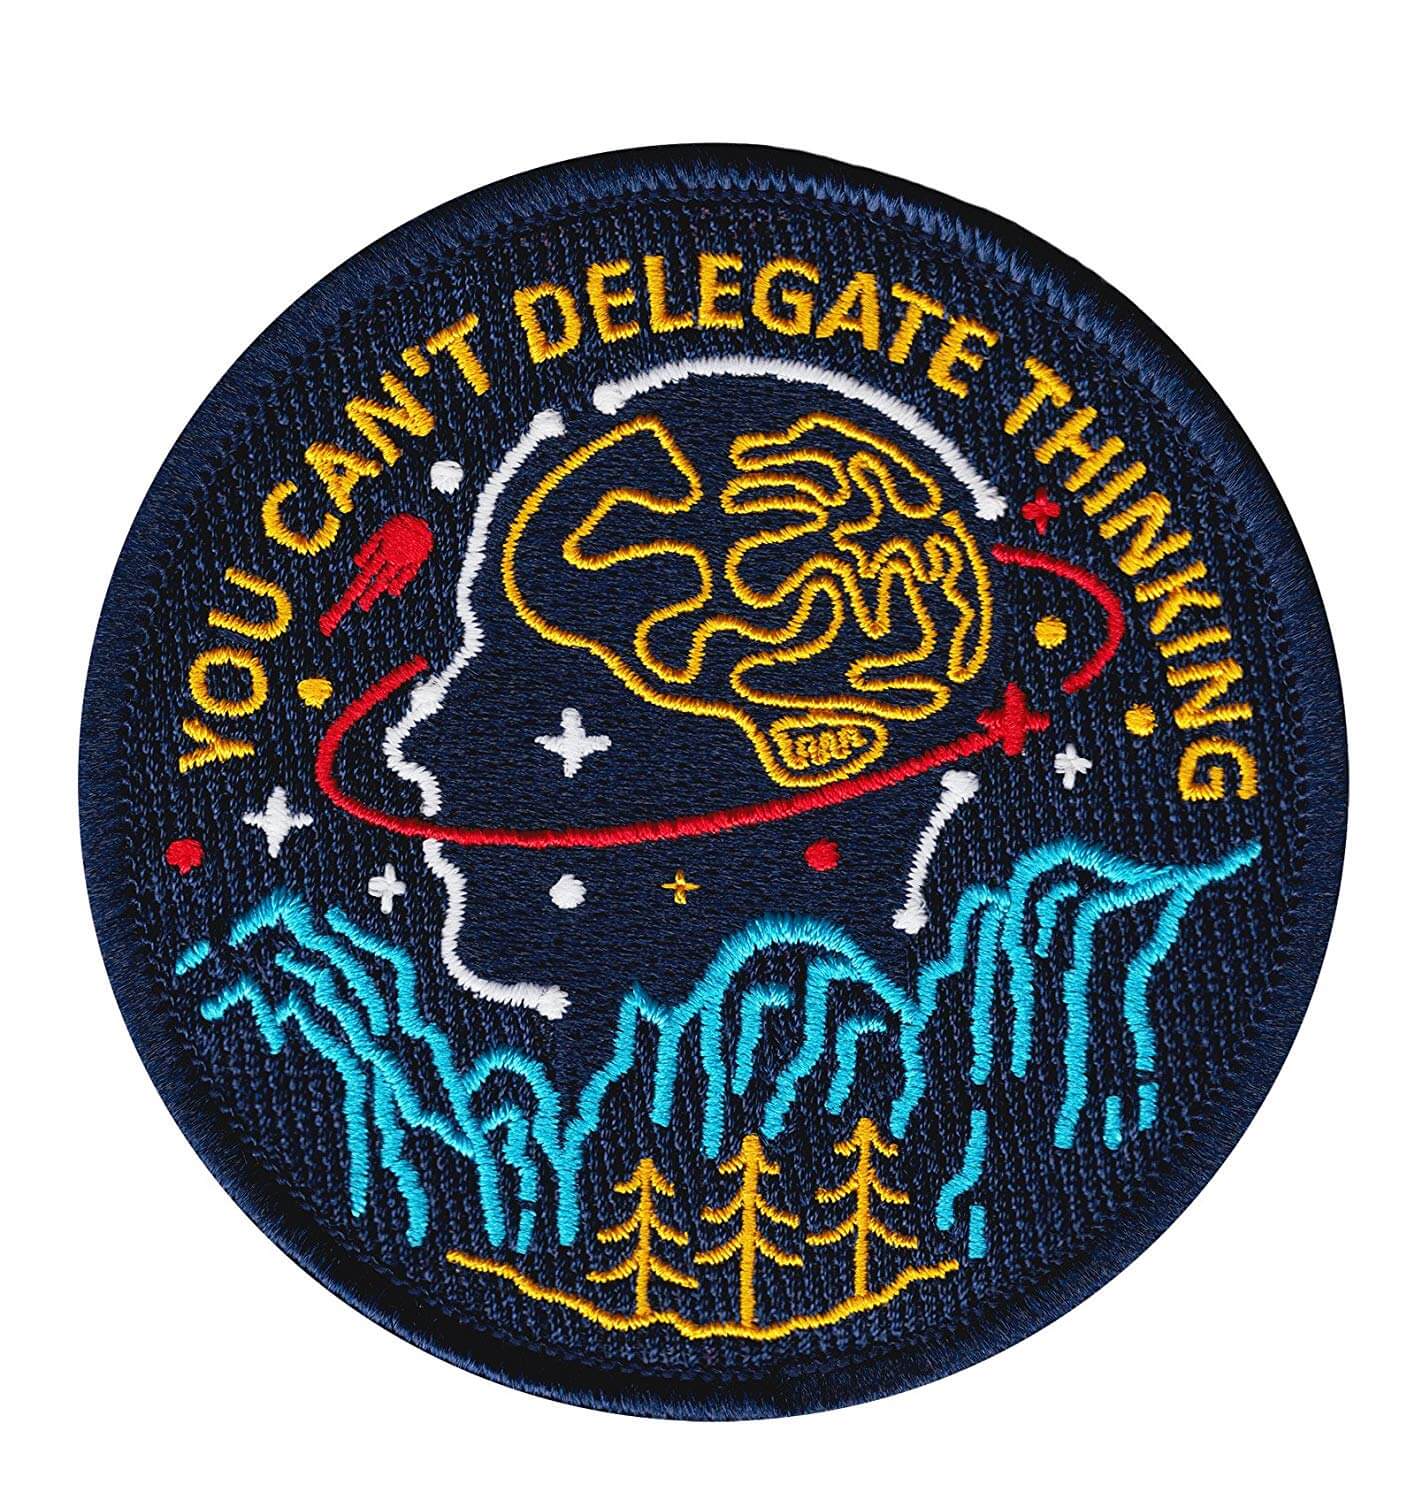 You can't delegate thinking embroidered iron on patch